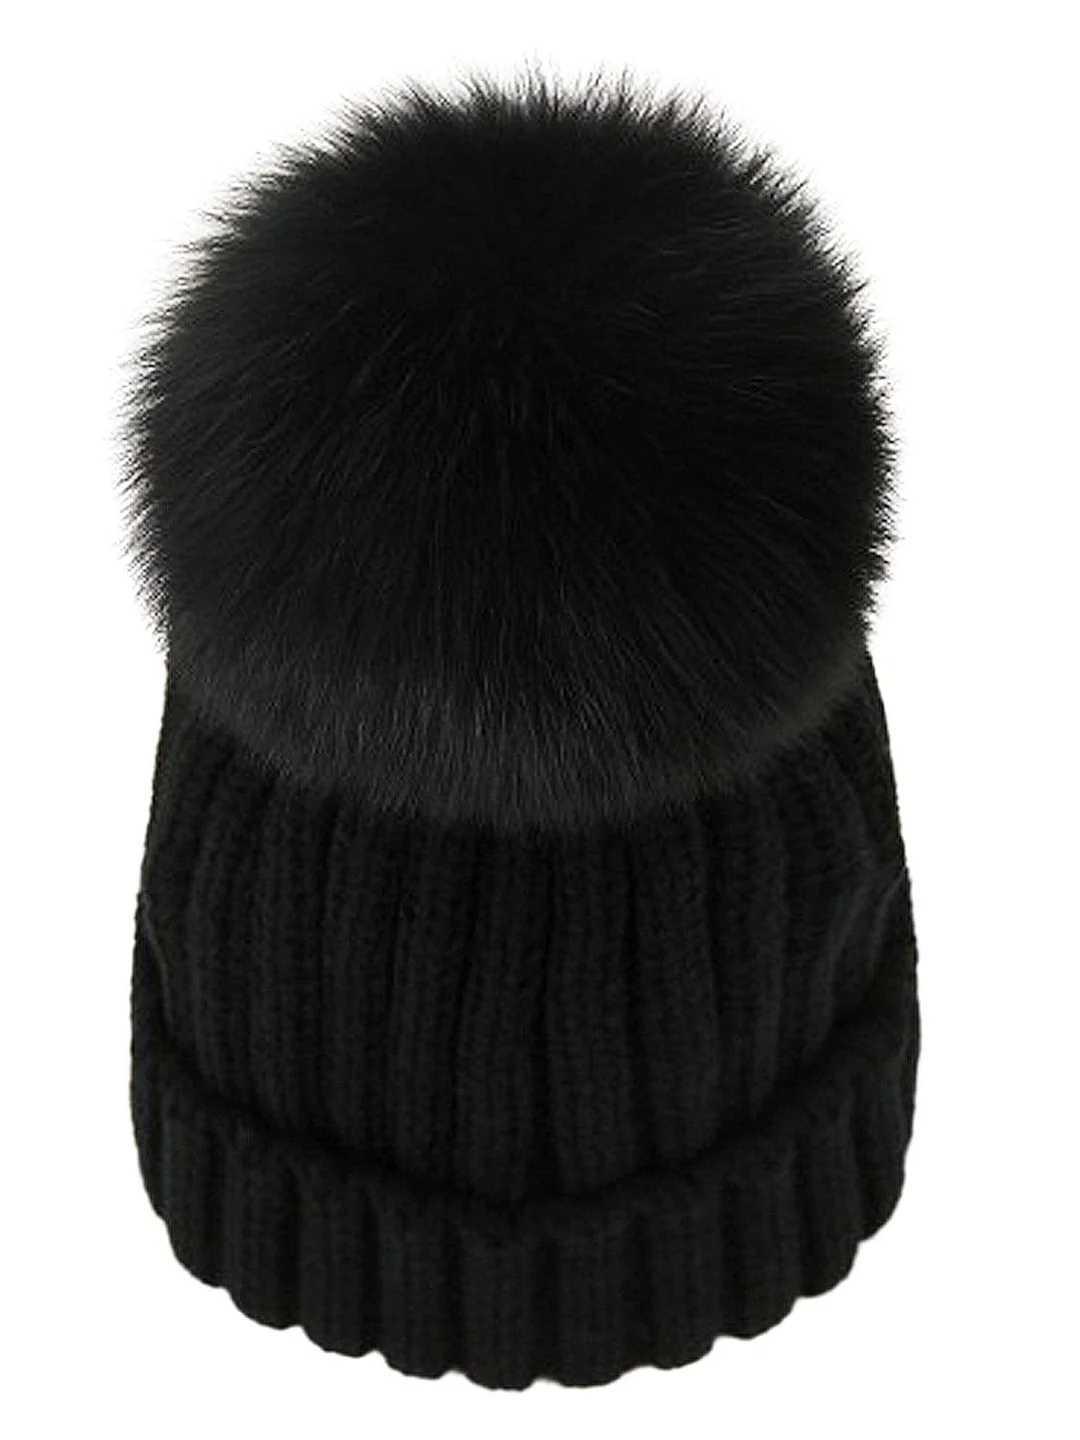 Women Winter Kintted Beanie Hats with Real Fox Fur Pom Pom